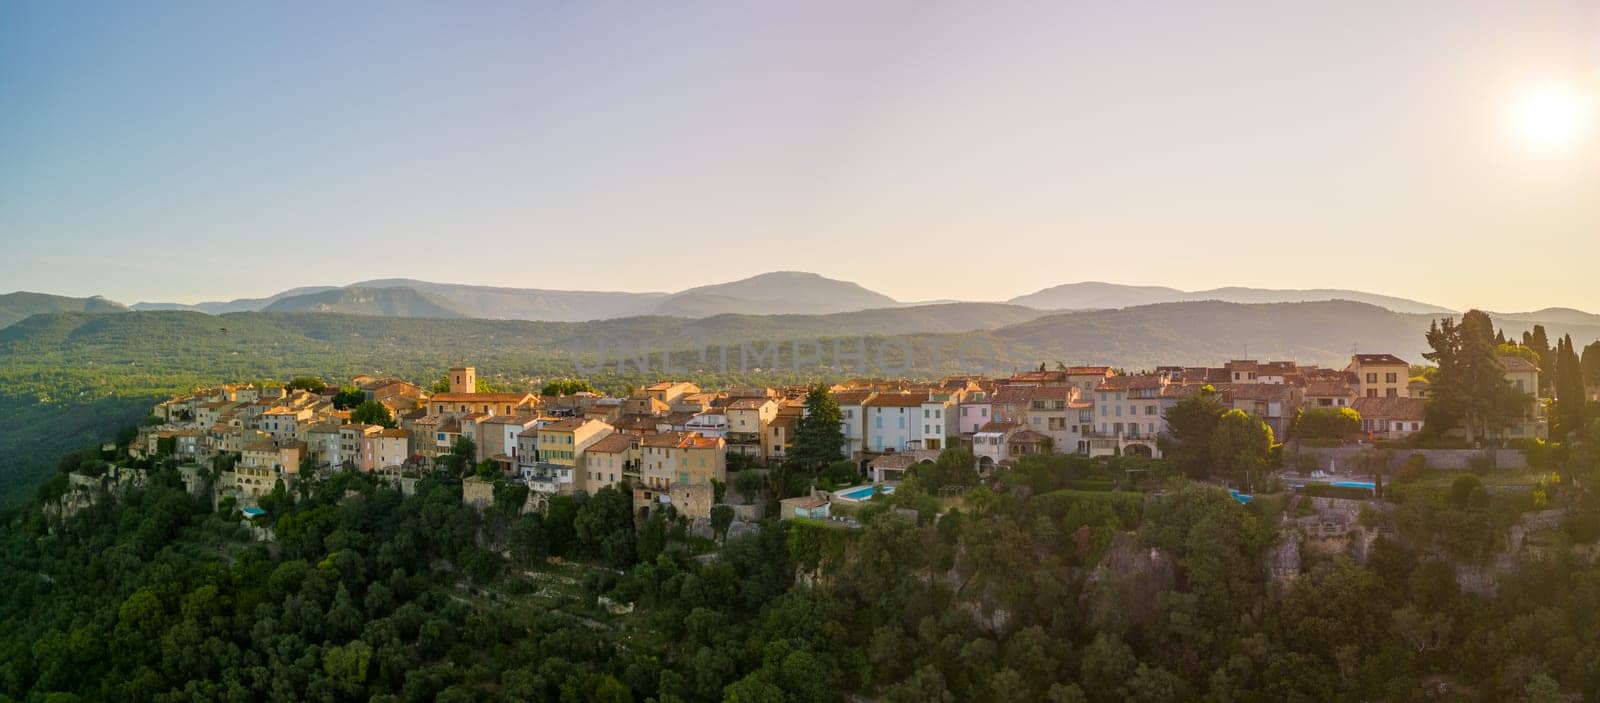 Early morning sun hits historic buildings in French mountain village. High quality photo